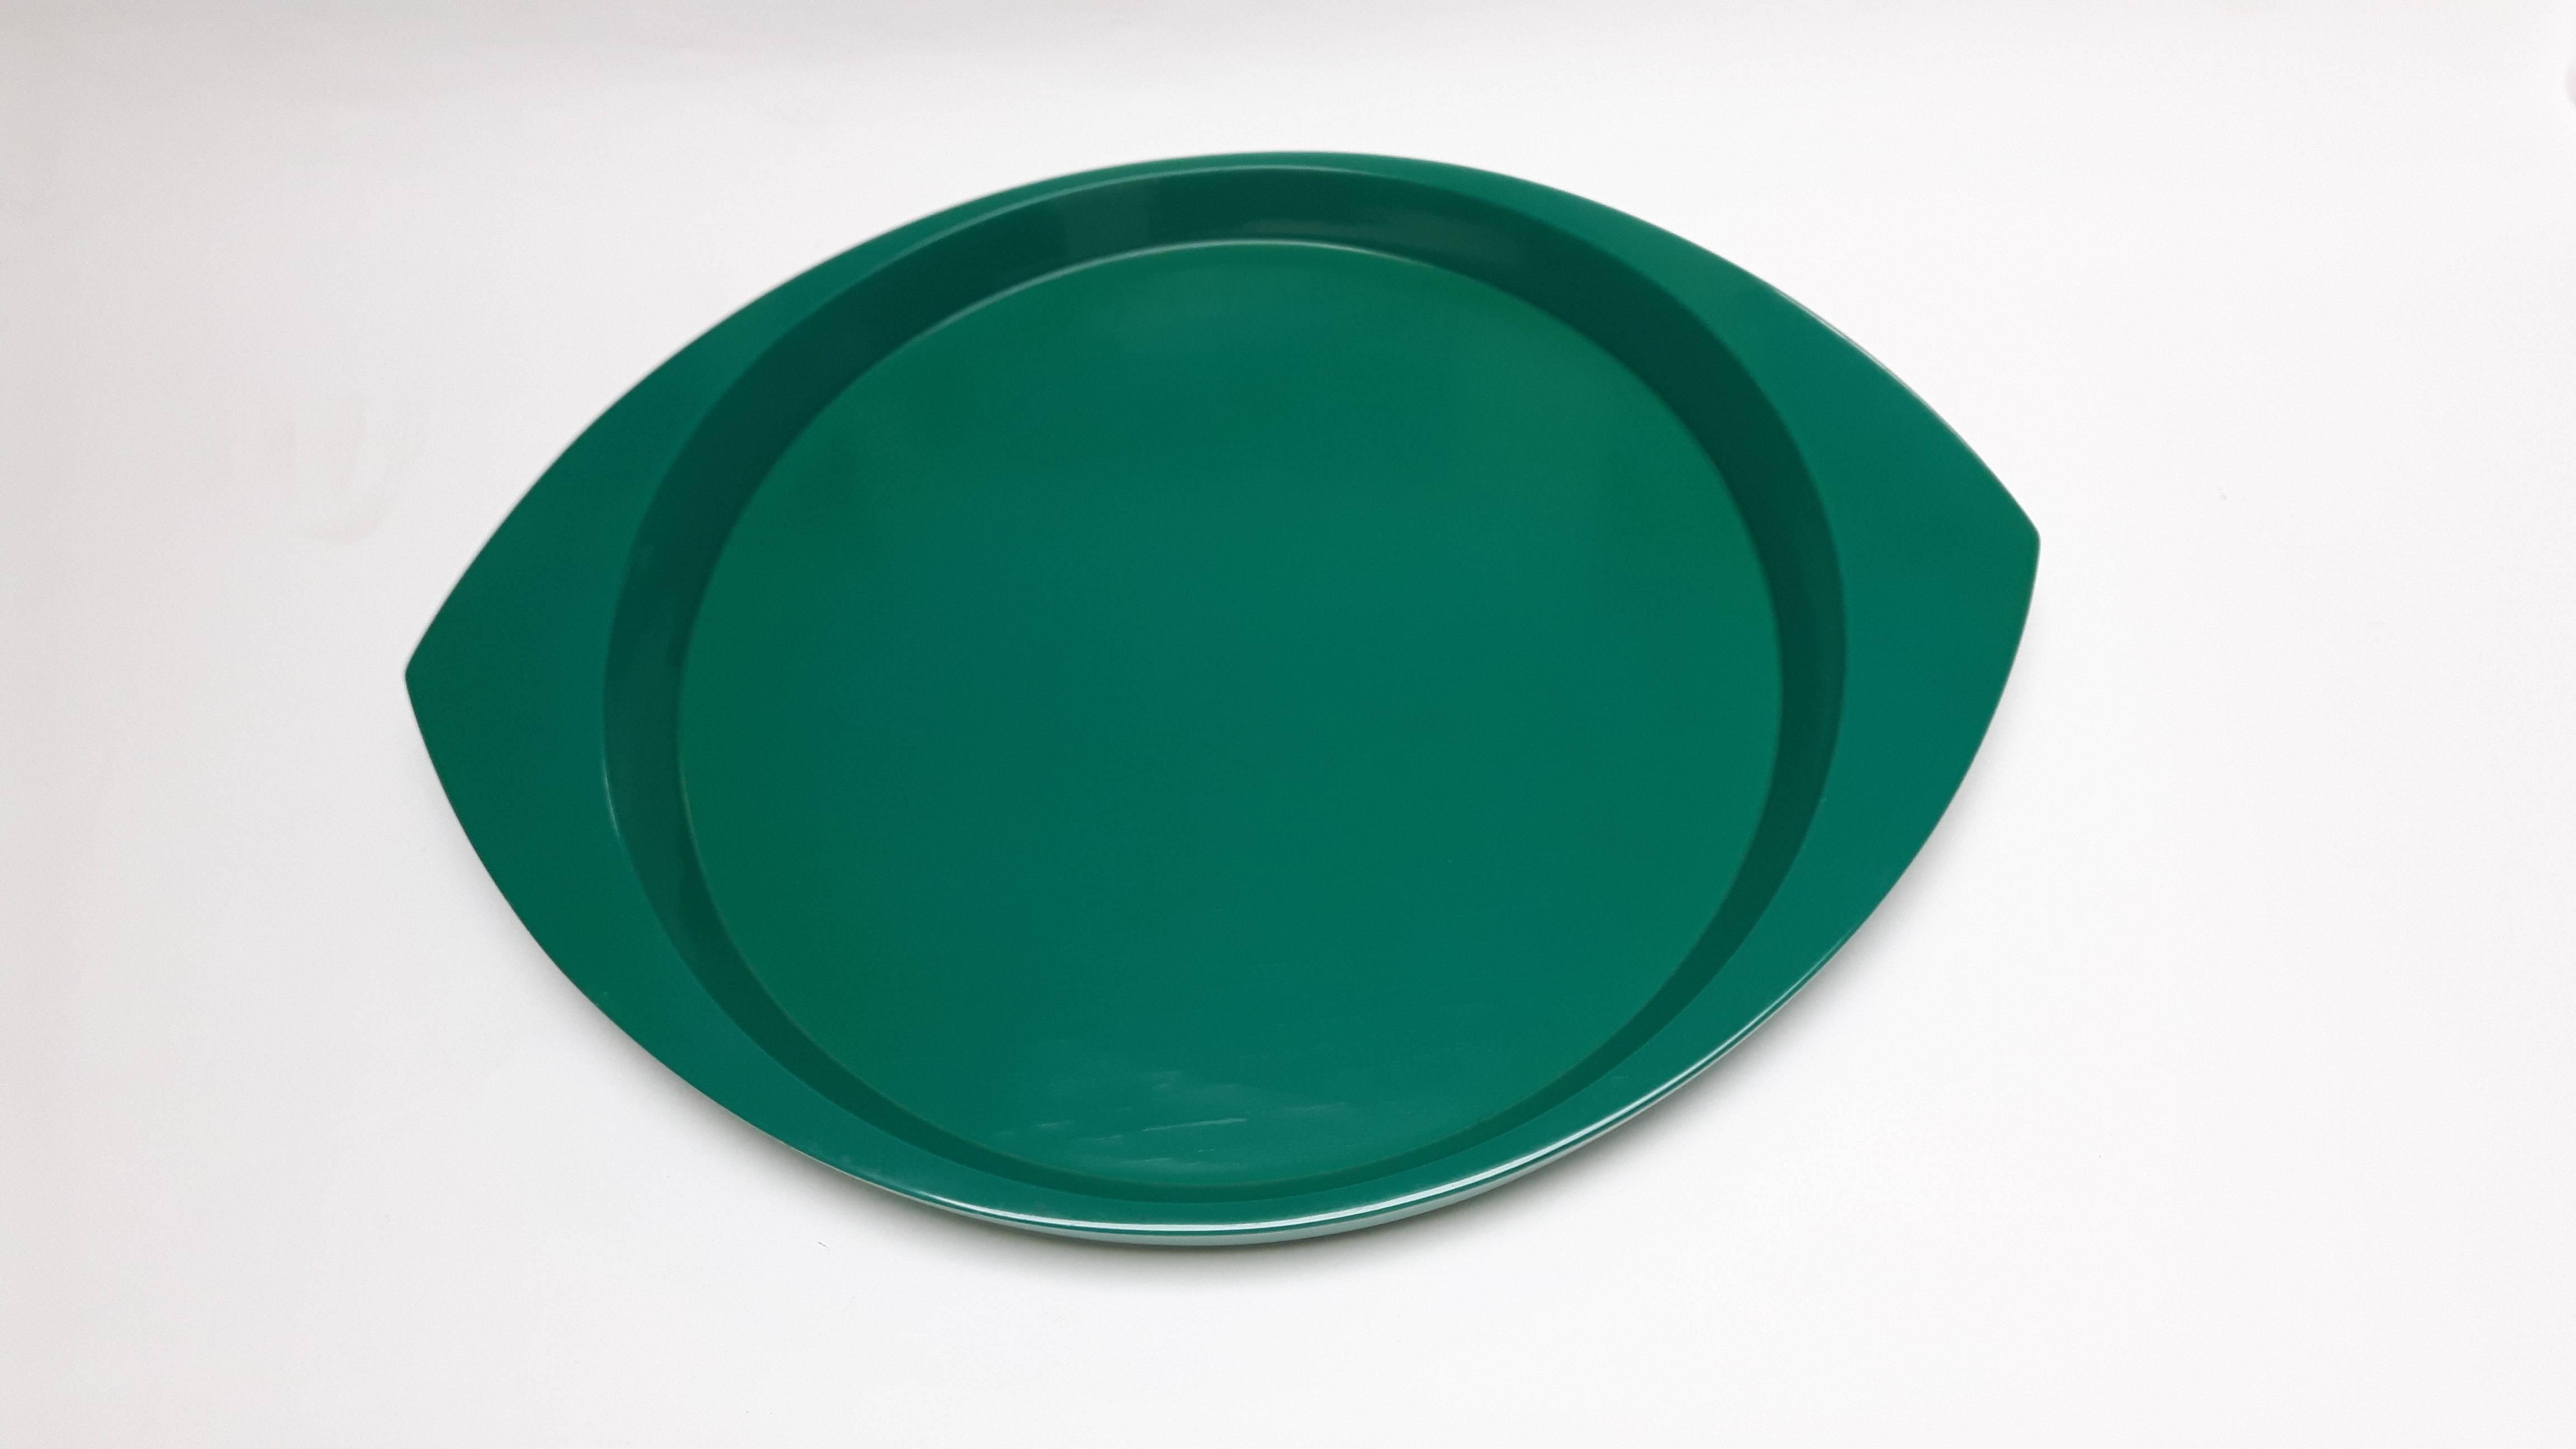 Amazing seafoam green lacquered wood serving tray designed by Jens Quistgaard for Dansk this houseware line was called the 